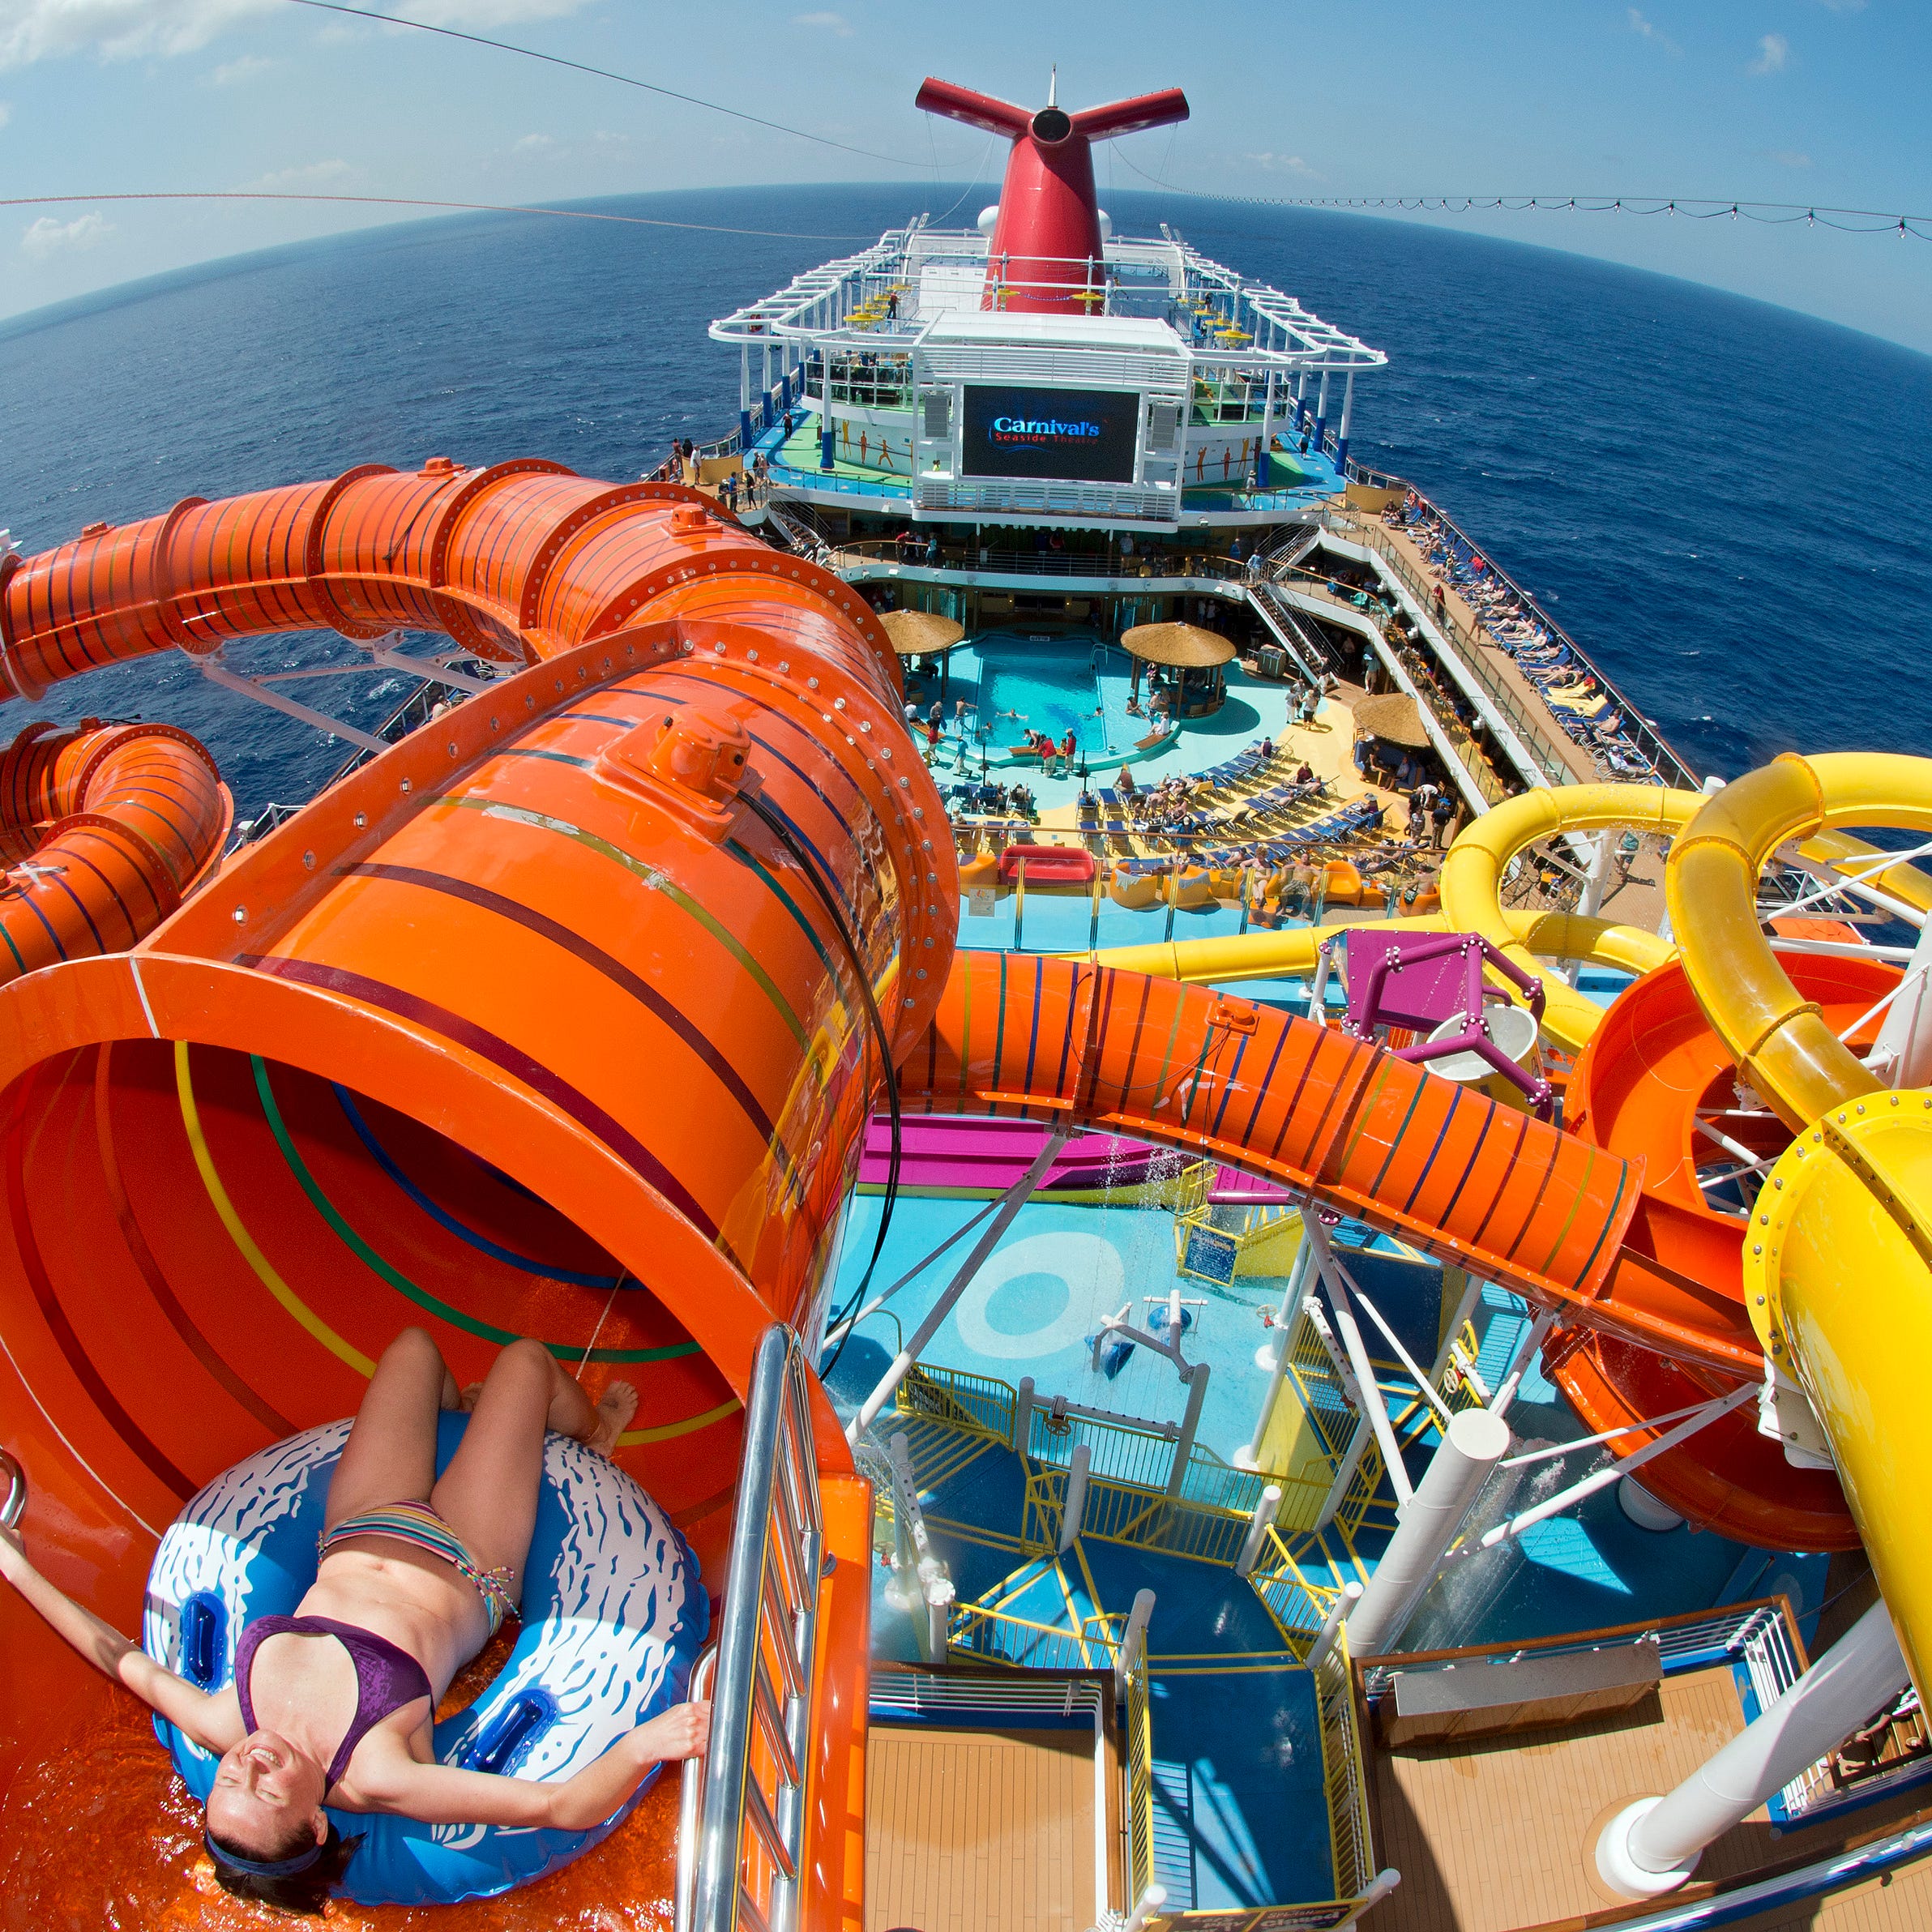 The orange Kaleid-O-Slide is part of the WaterWorks fun zone atop cruise giant Carnival's new Carnival Vista.